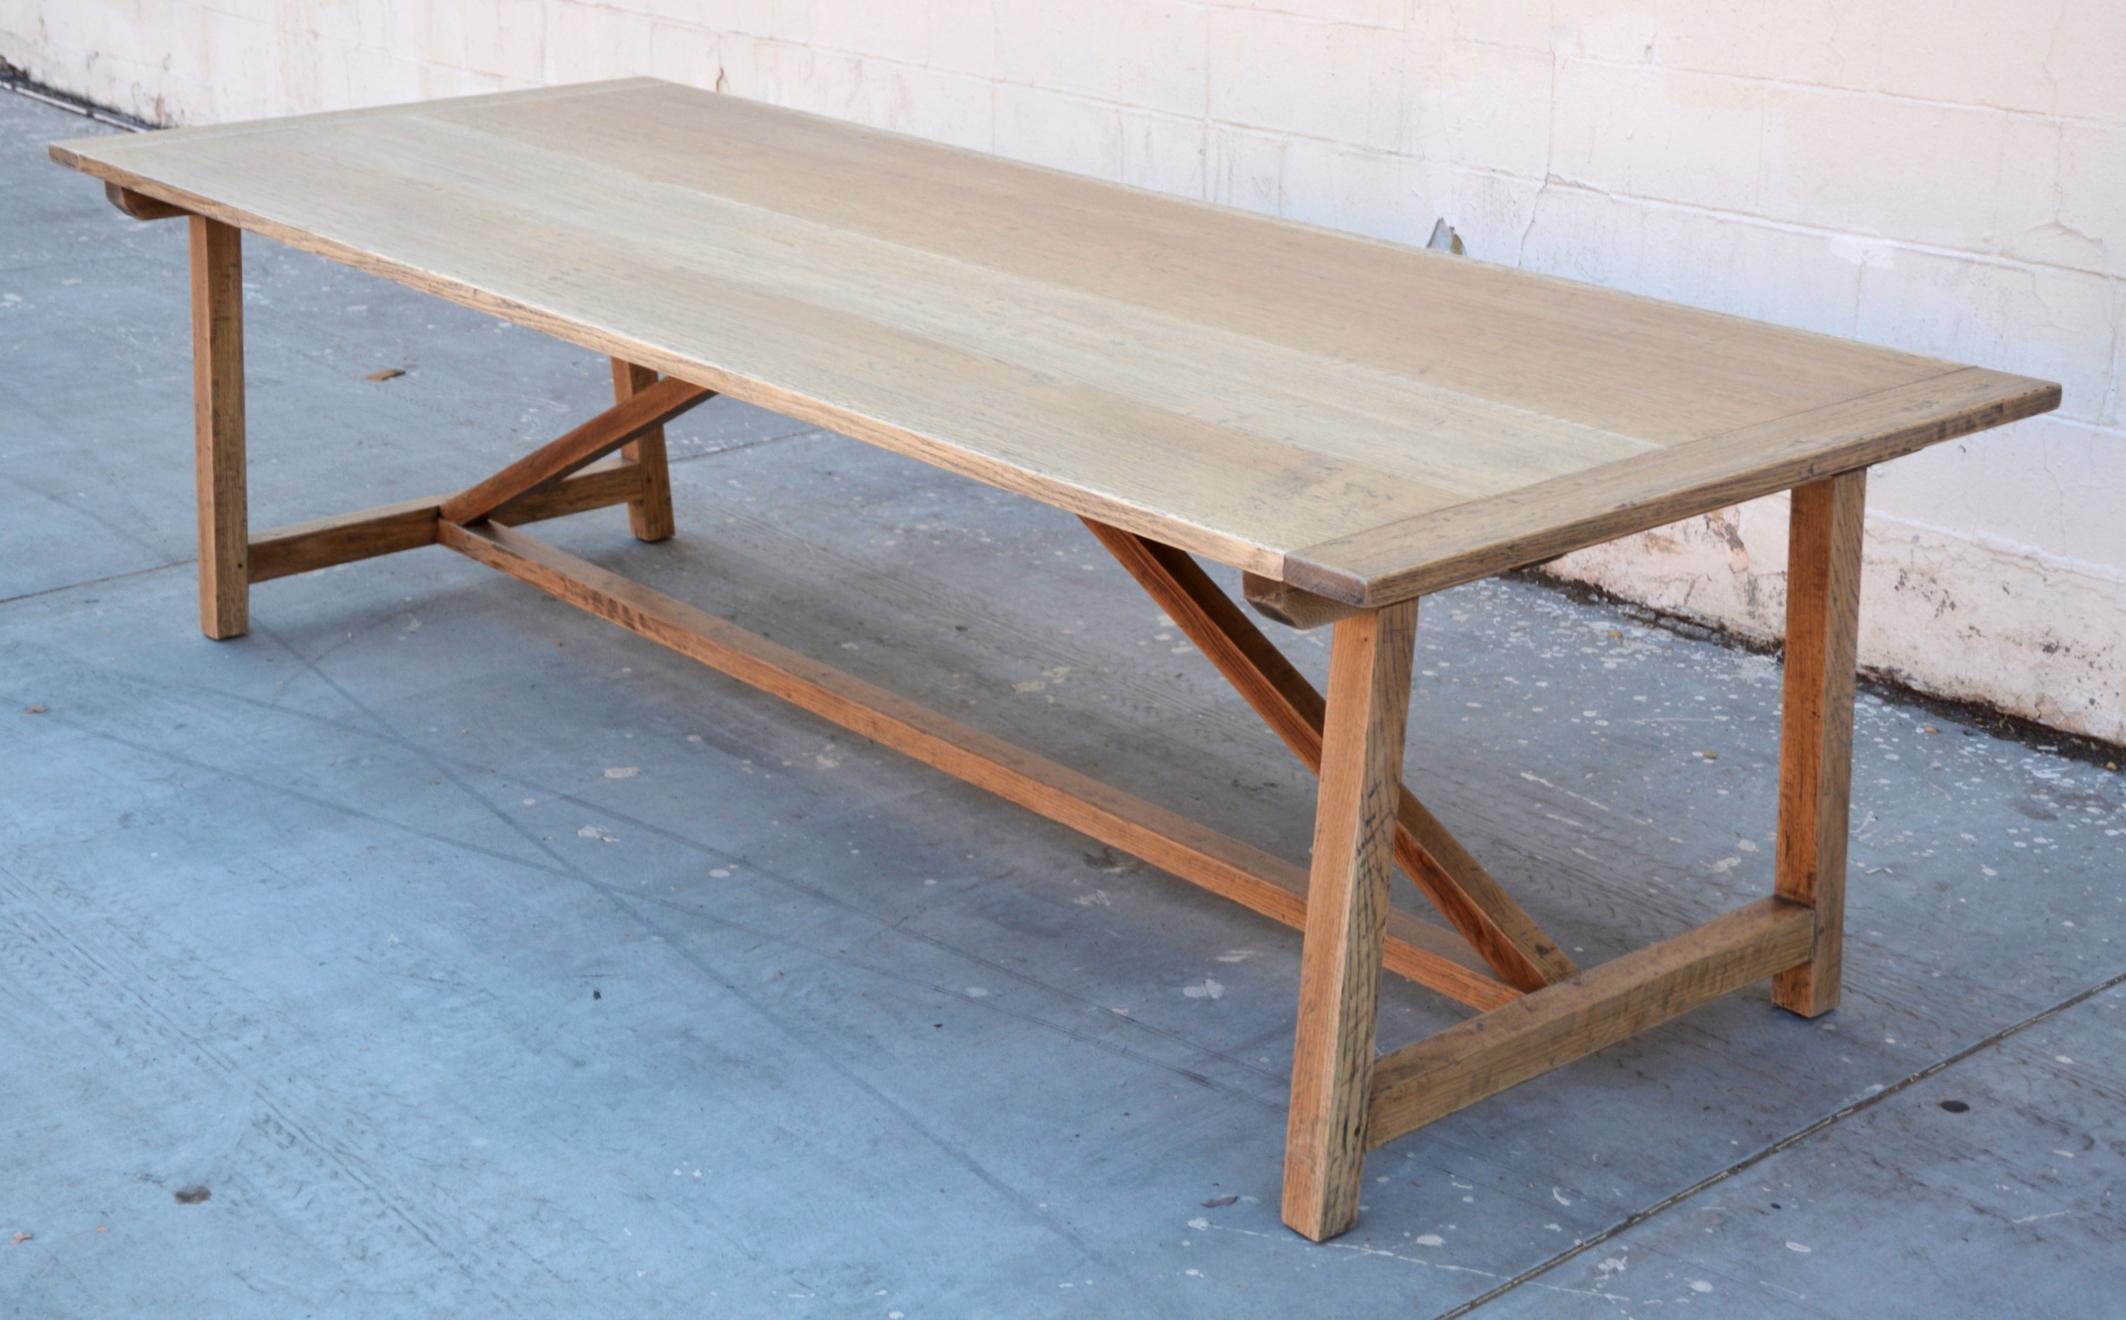 This custom built farm table is made from distressed, rift sawn oak and can be made with or without extension leaves. The table shown here is 112